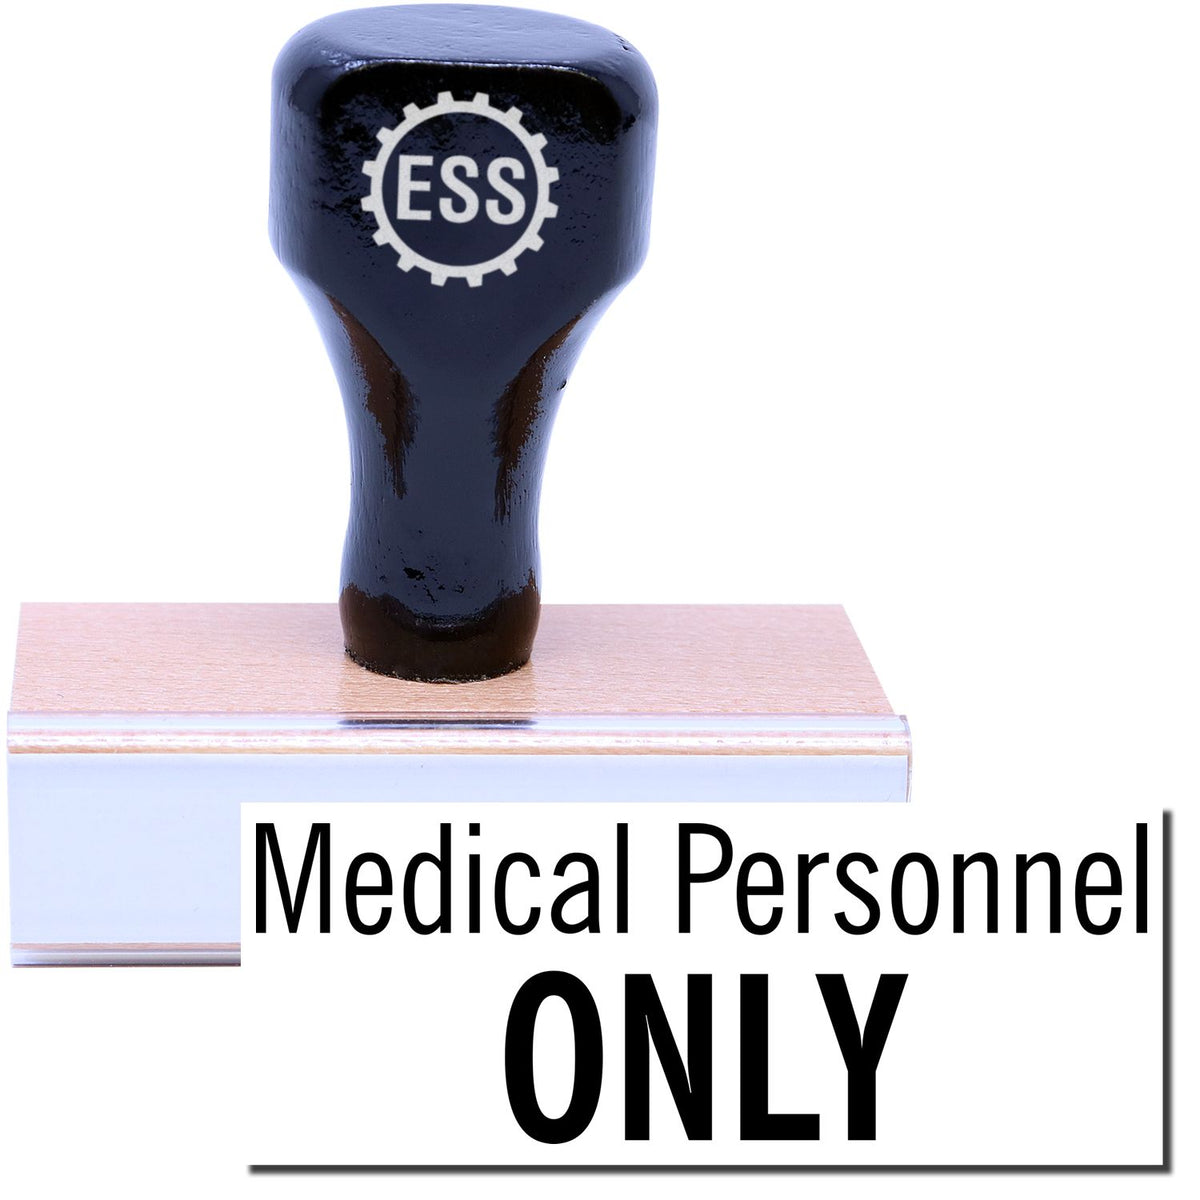 A stock office rubber stamp with a stamped image showing how the text &quot;Medical Personnel ONLY&quot; in a large font is displayed after stamping.